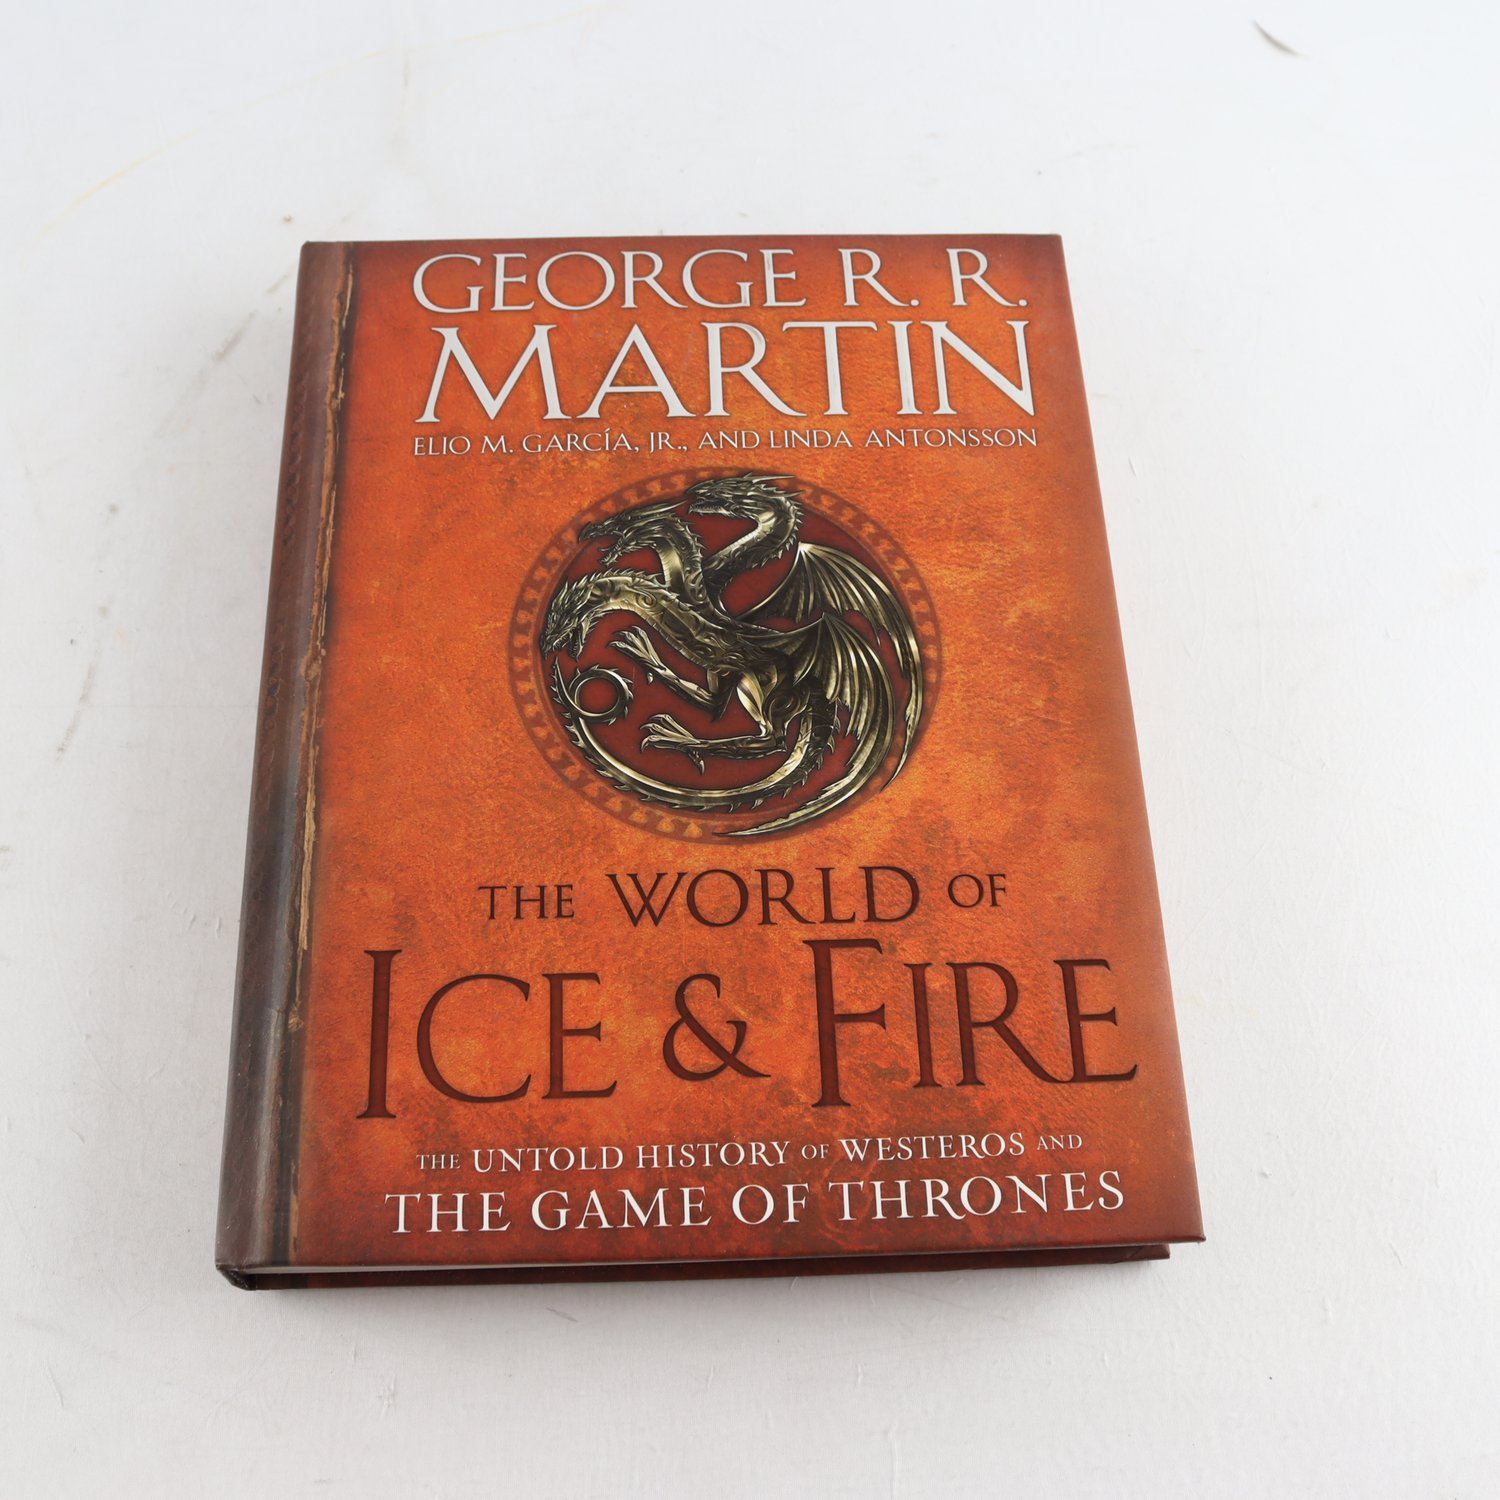 George R. R. Martin, The World of Ice & Fire